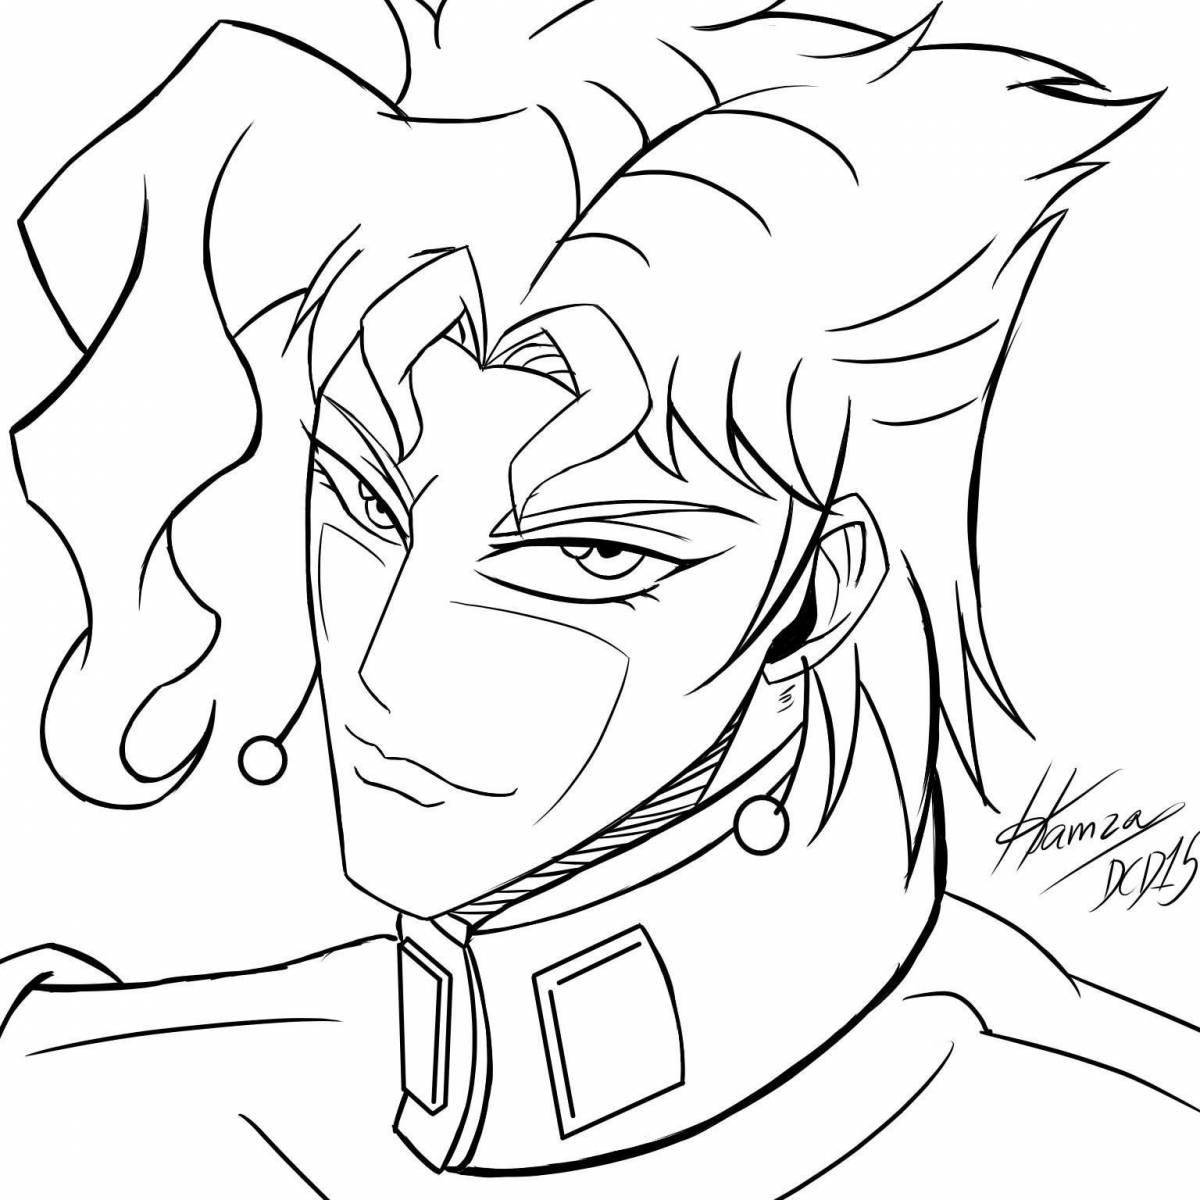 Dio comic coloring page